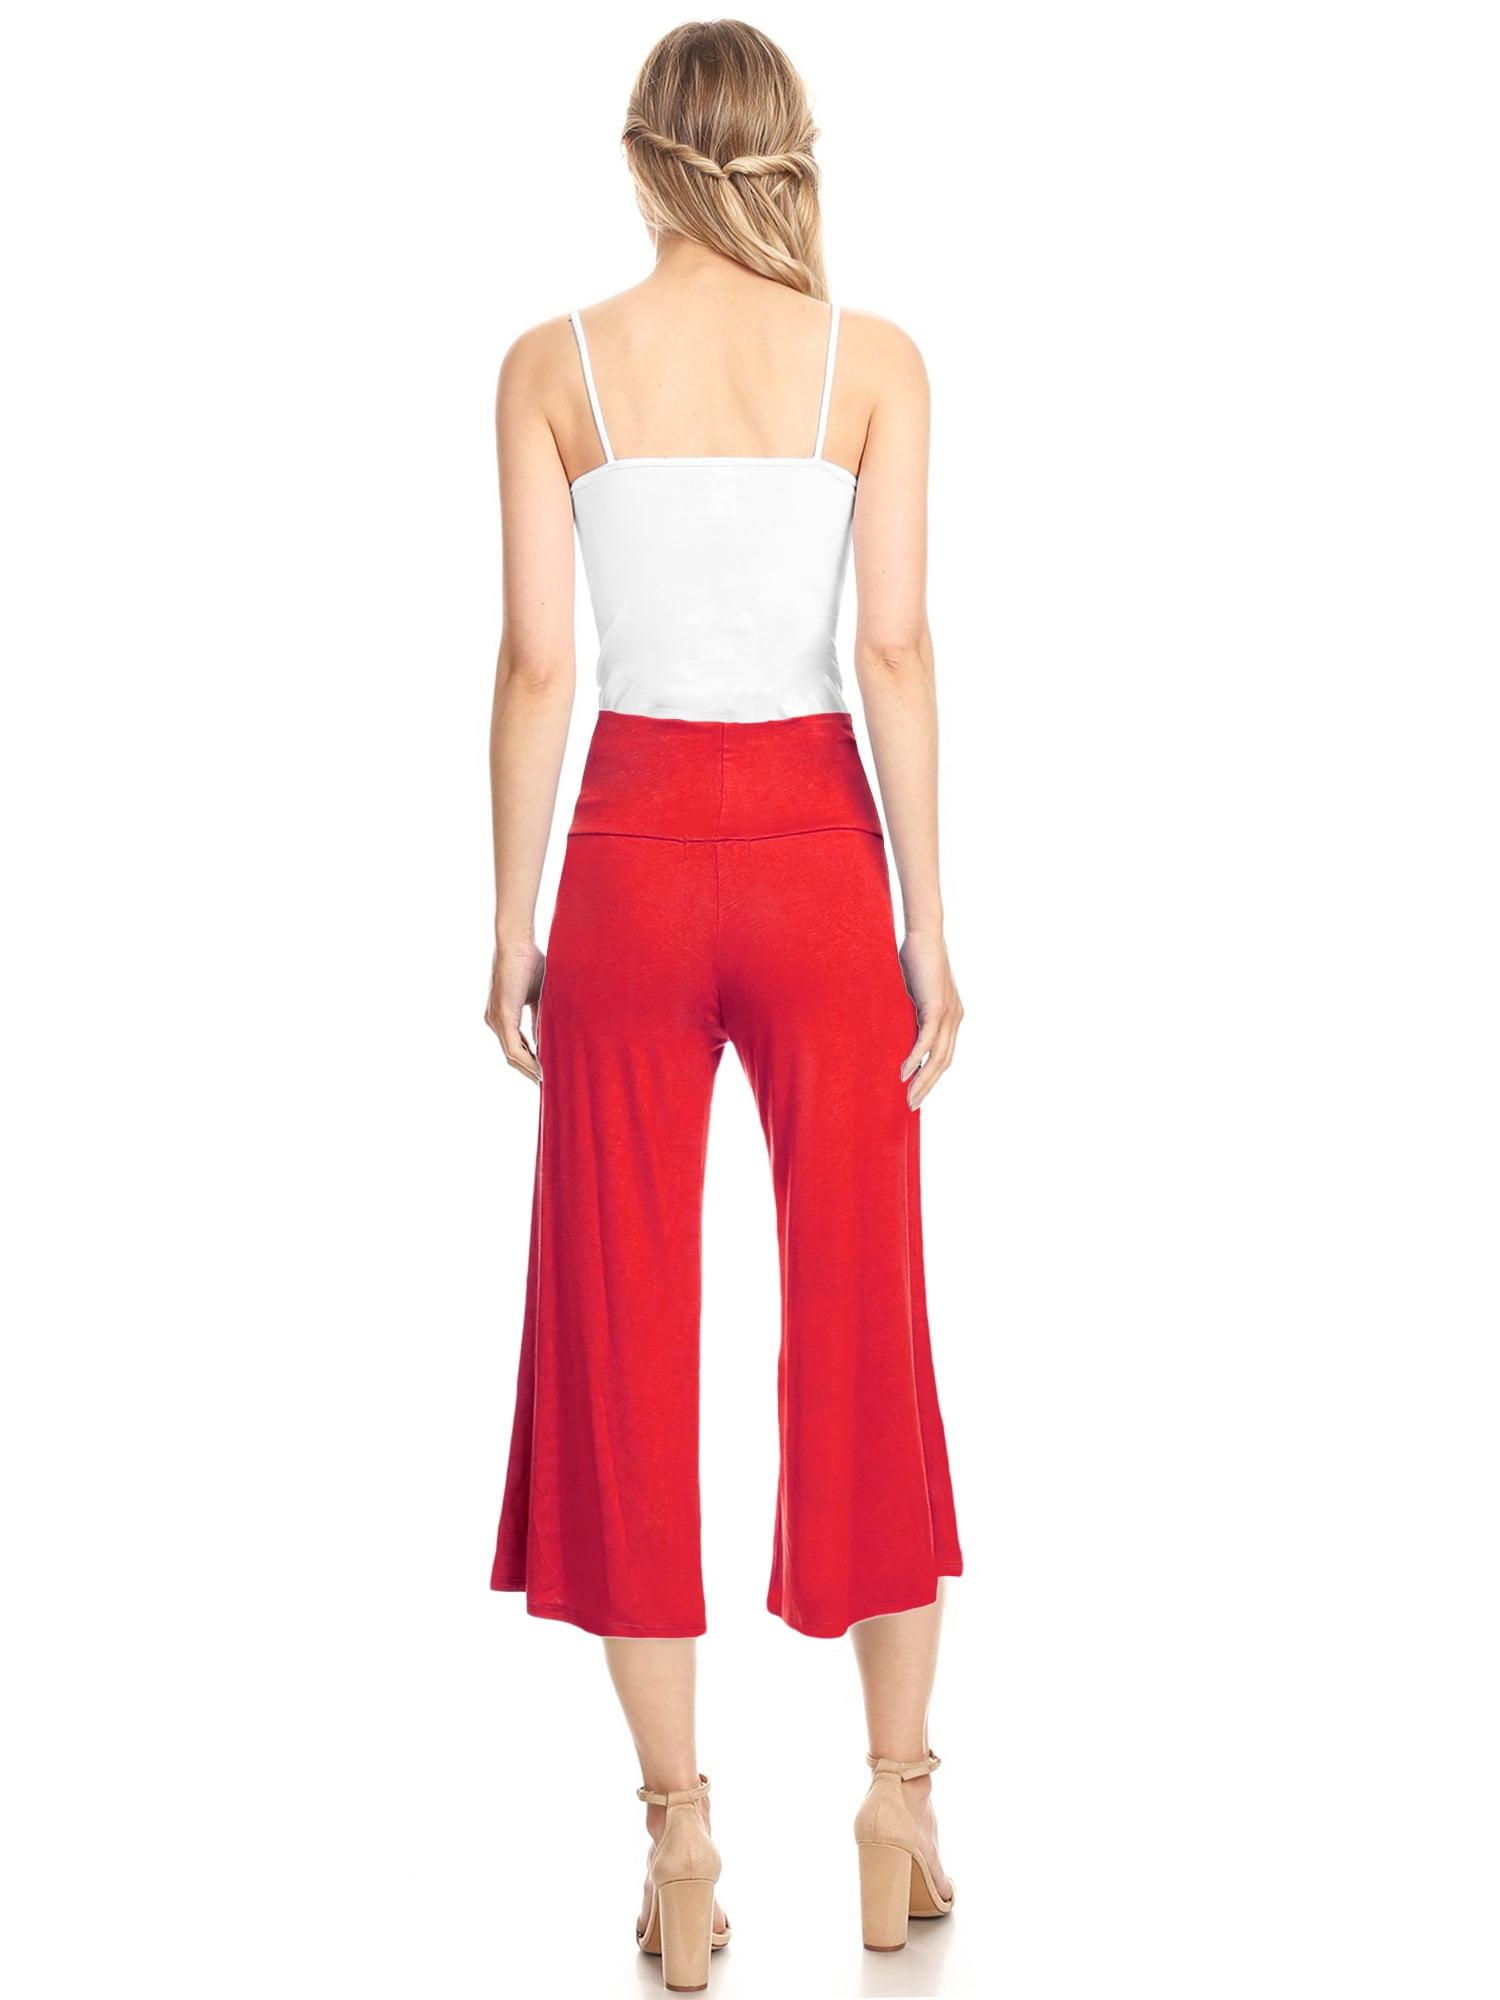 Made by Culottes Women\'s L Knit RED Johnny Pants